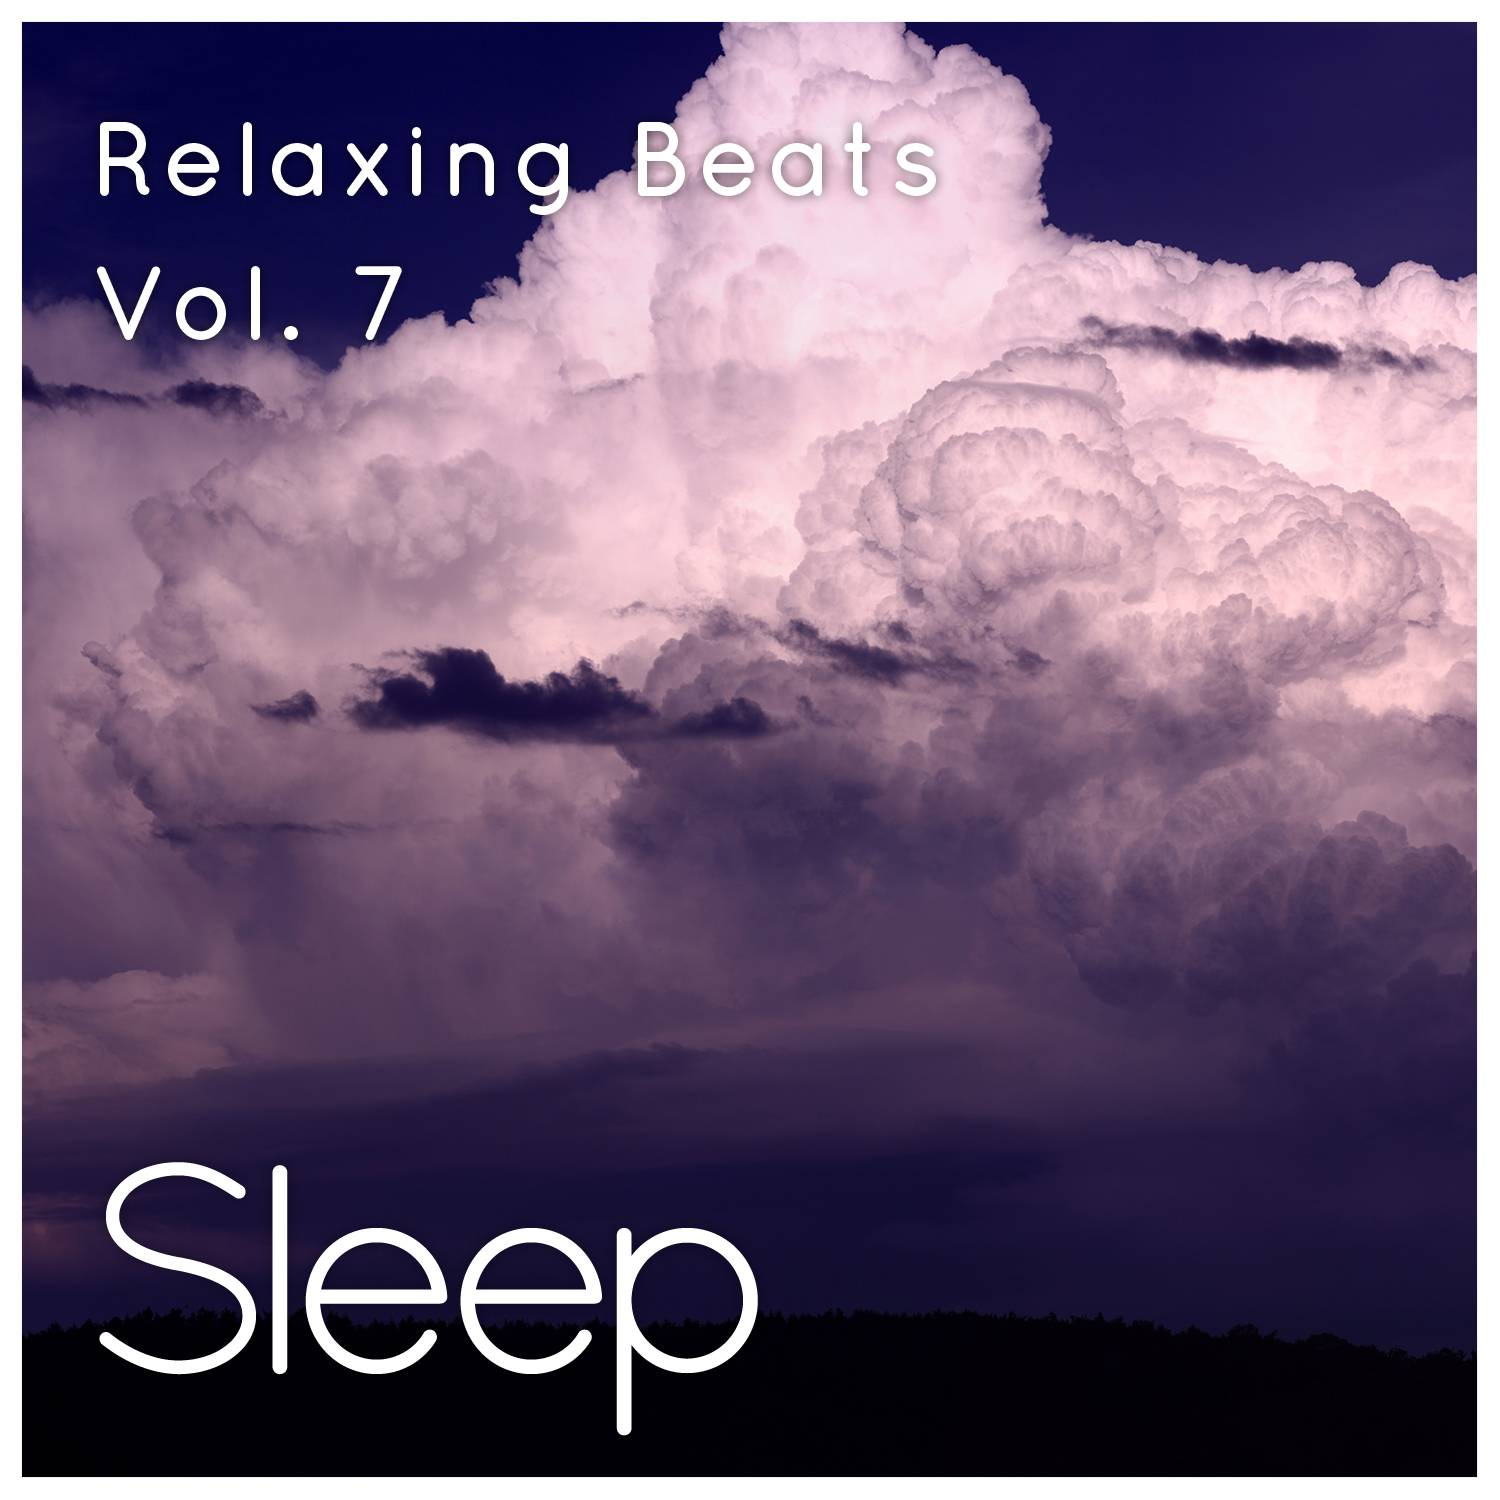 Relaxing Ambient Sleep Sounds, Pt. 32